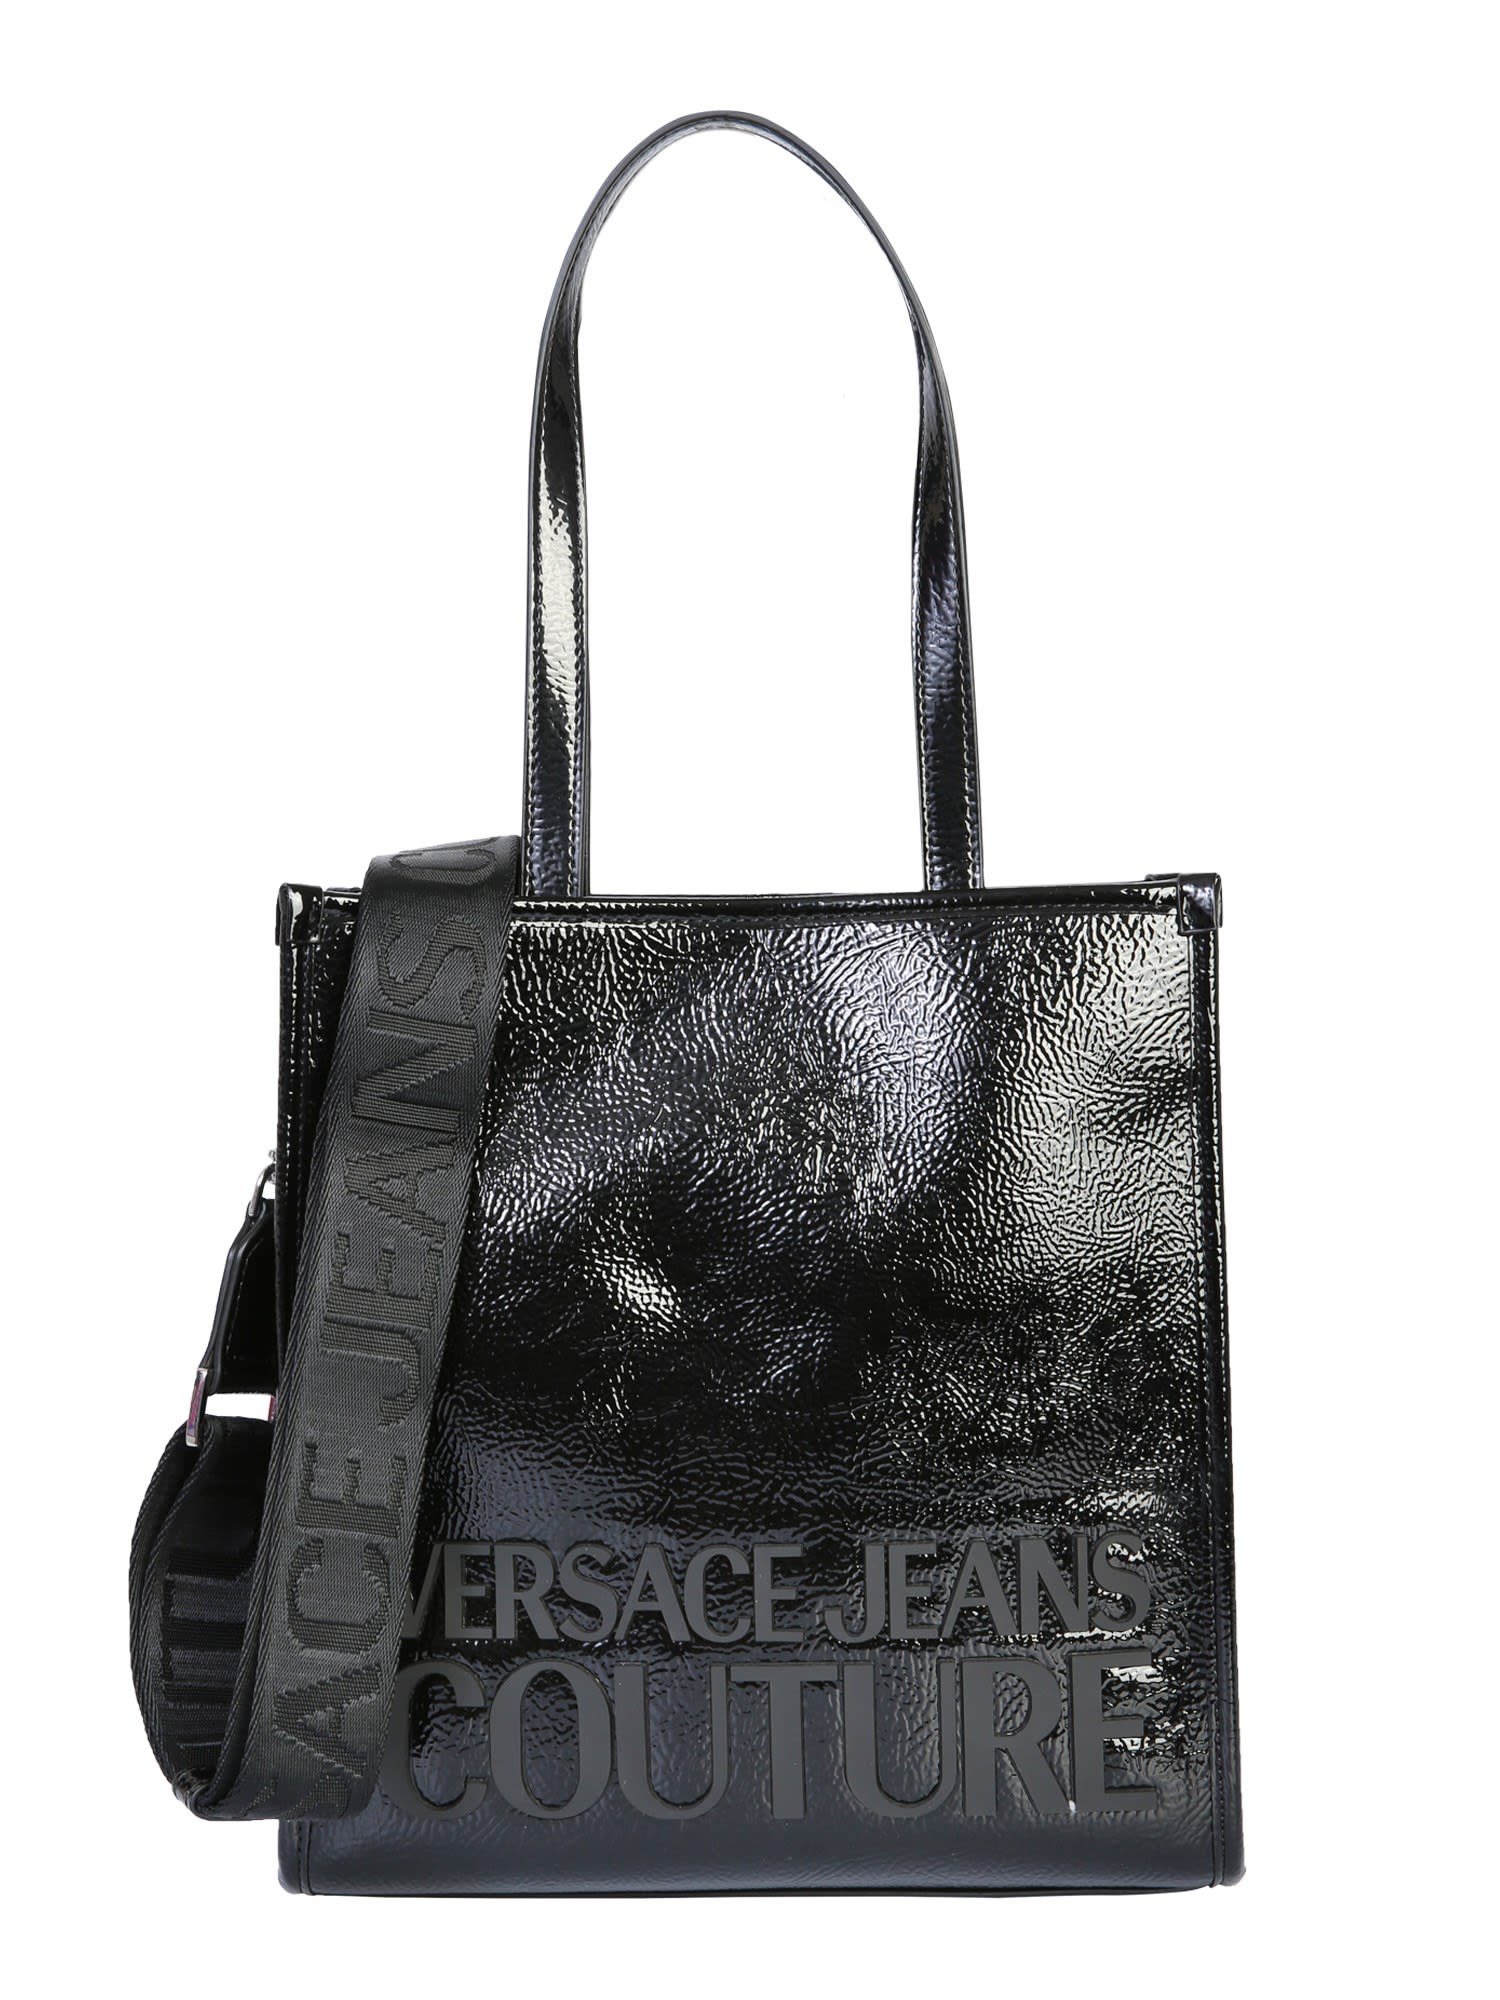 VERSACE JEANS COUTURE SMALL TOTE BAG WITH LOGO,11235941